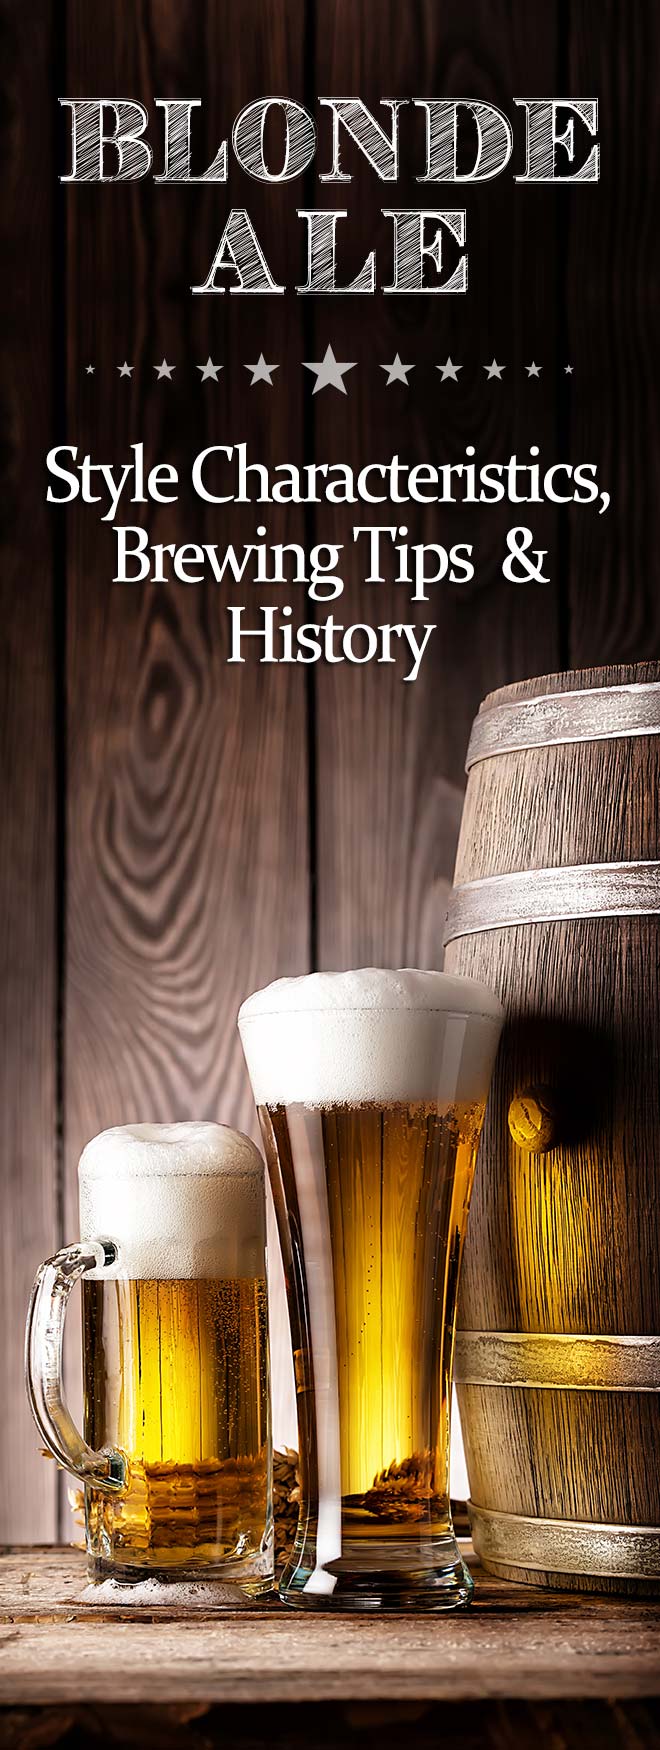 Blonde Ale: Style Characteristics, Brewing Tips & History